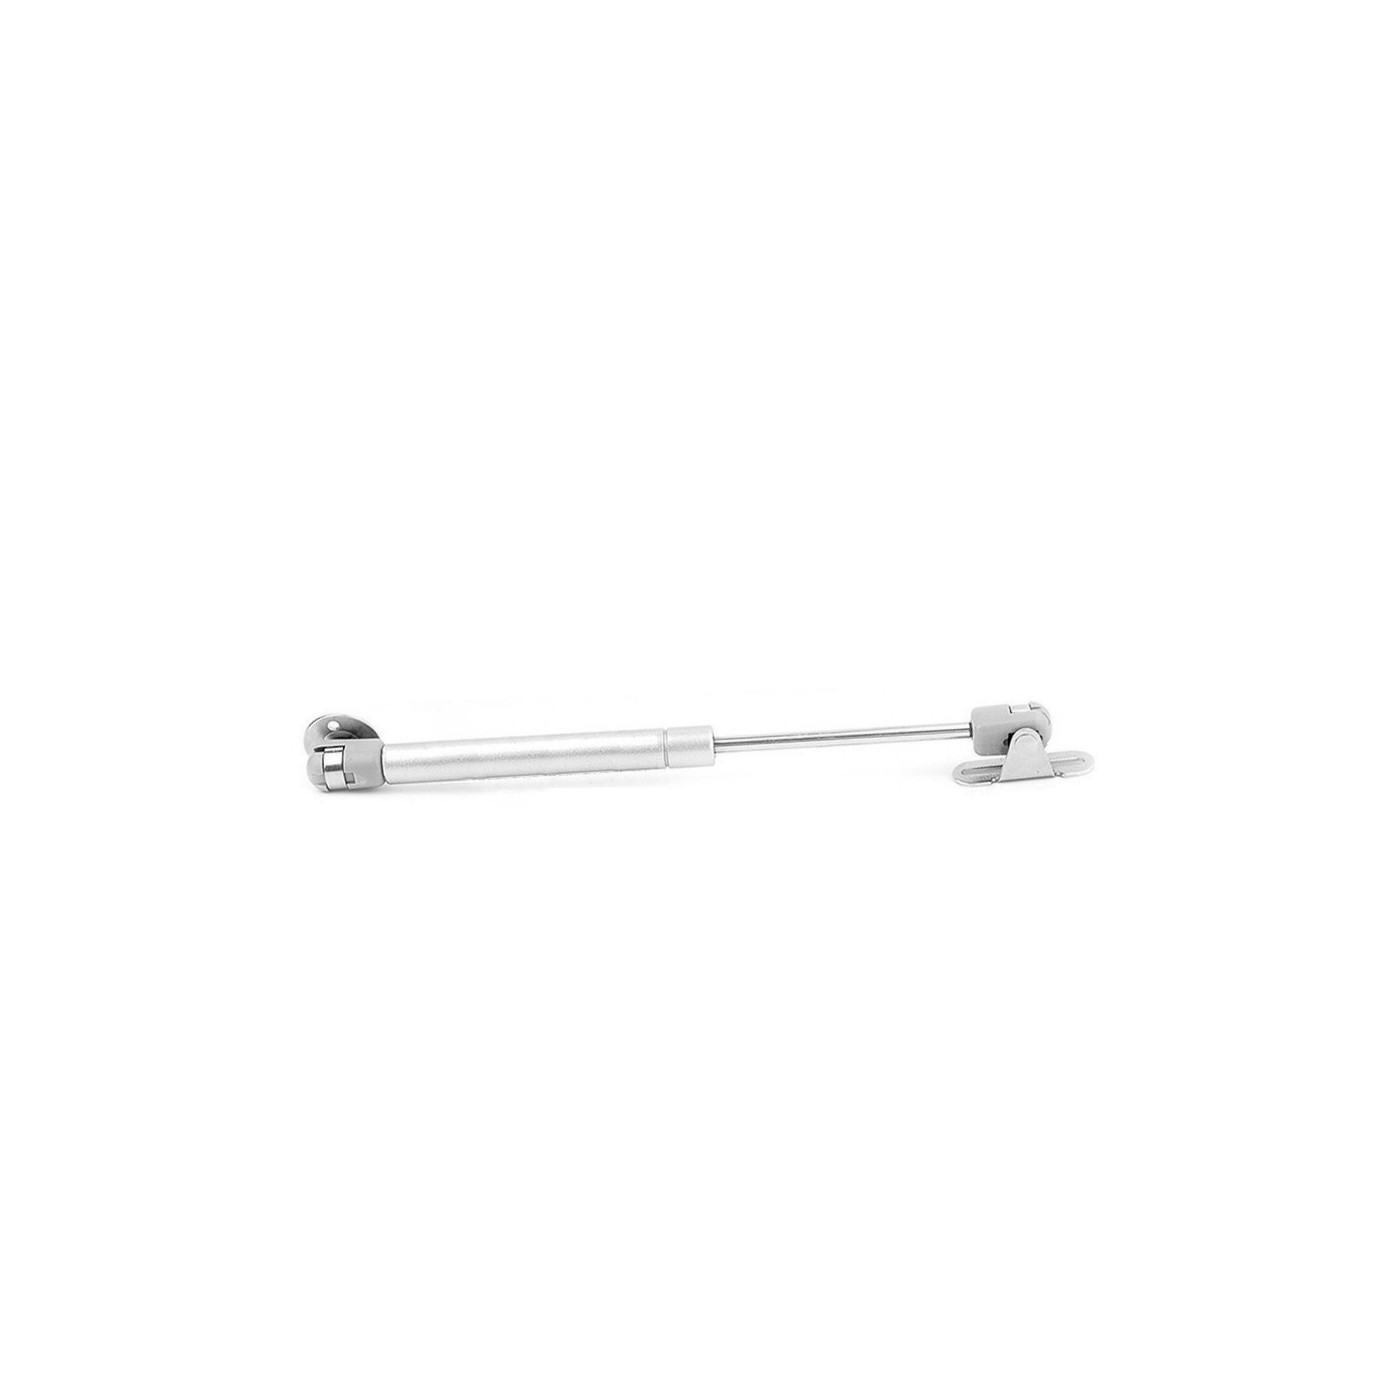 Universal gas spring with brackets (60N/6kg, 244 mm, silver)